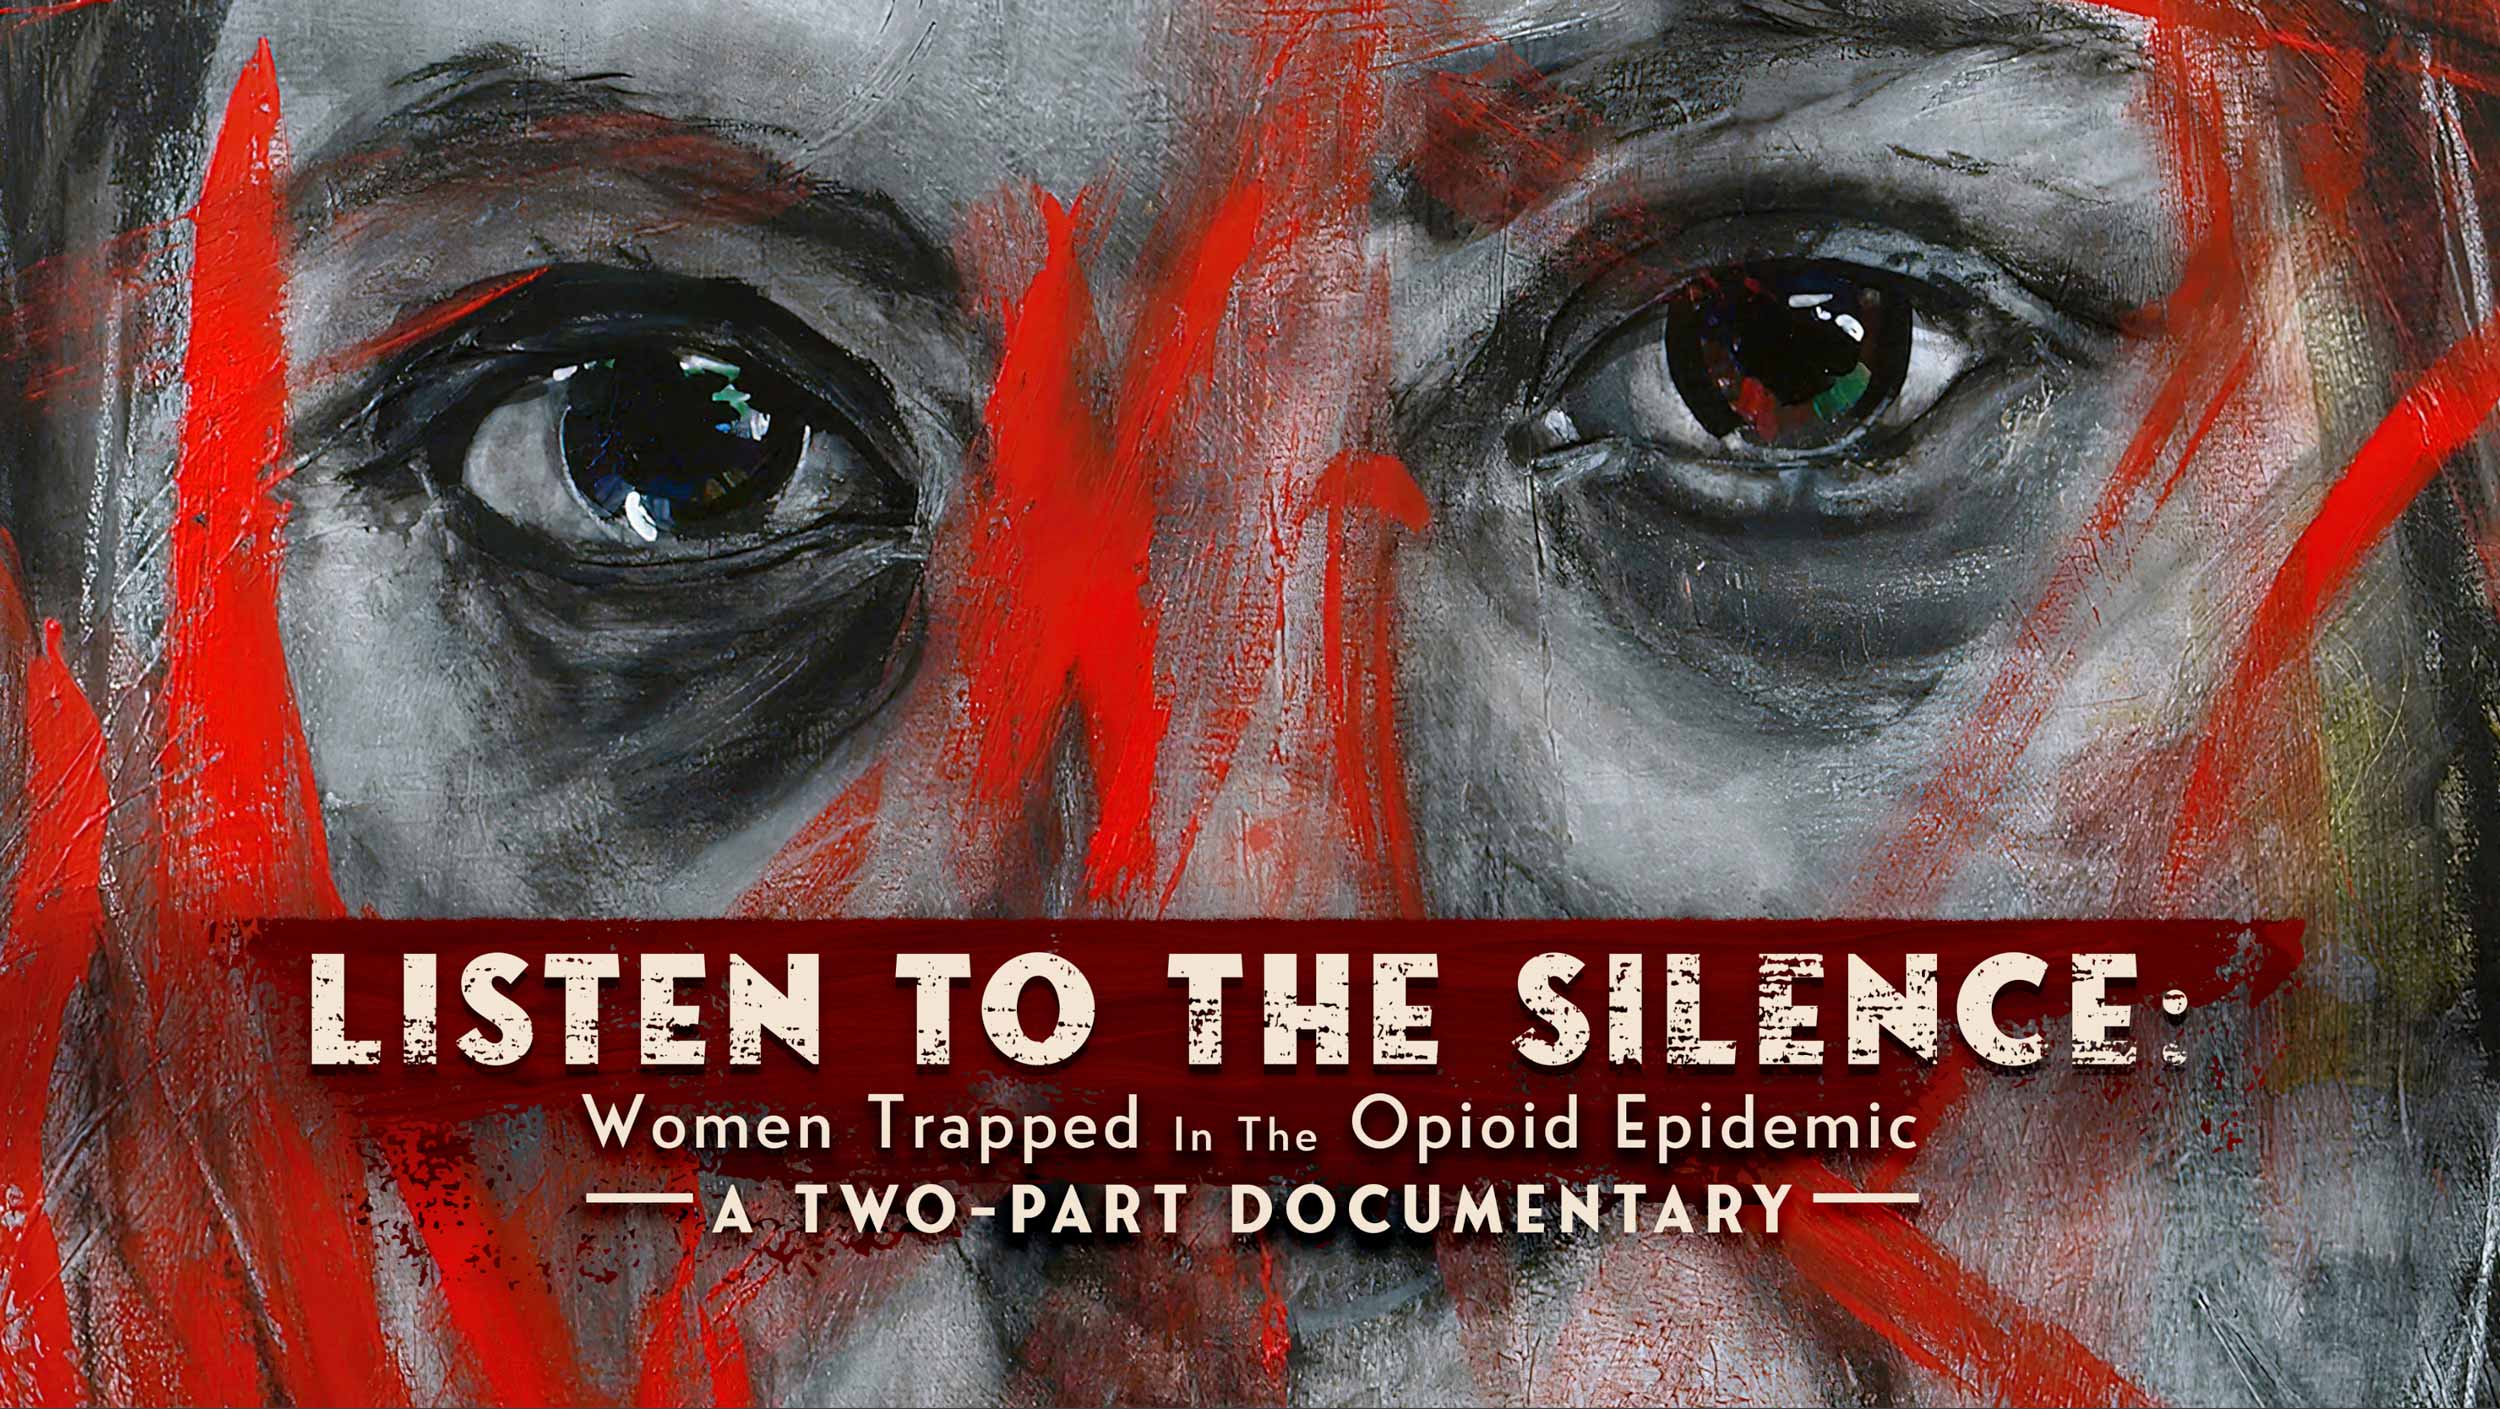 Listen to the Silence: Women Trapped in the Opioid Epidemic